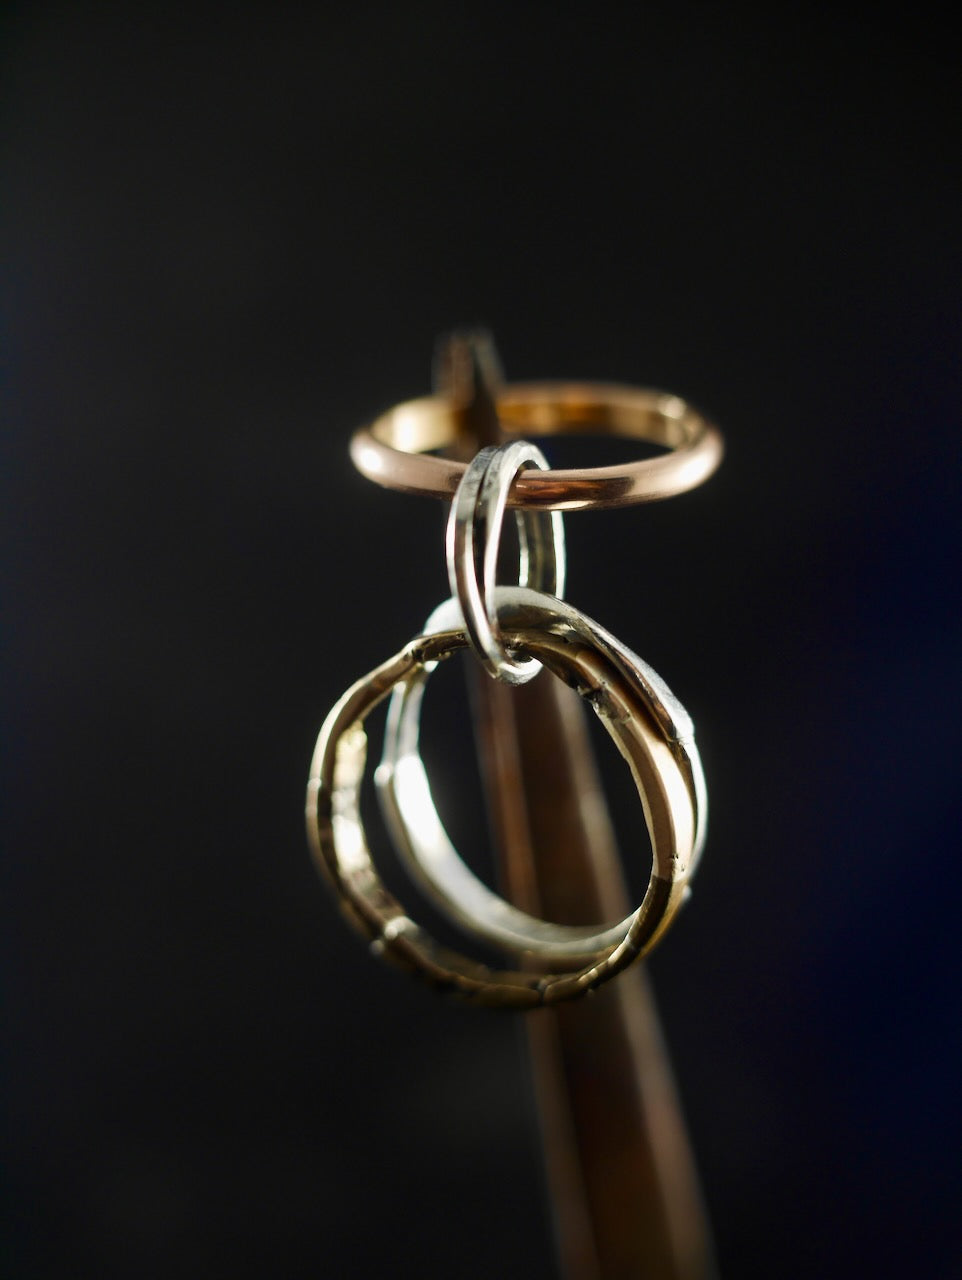 Triple Ring in Silver and Gold